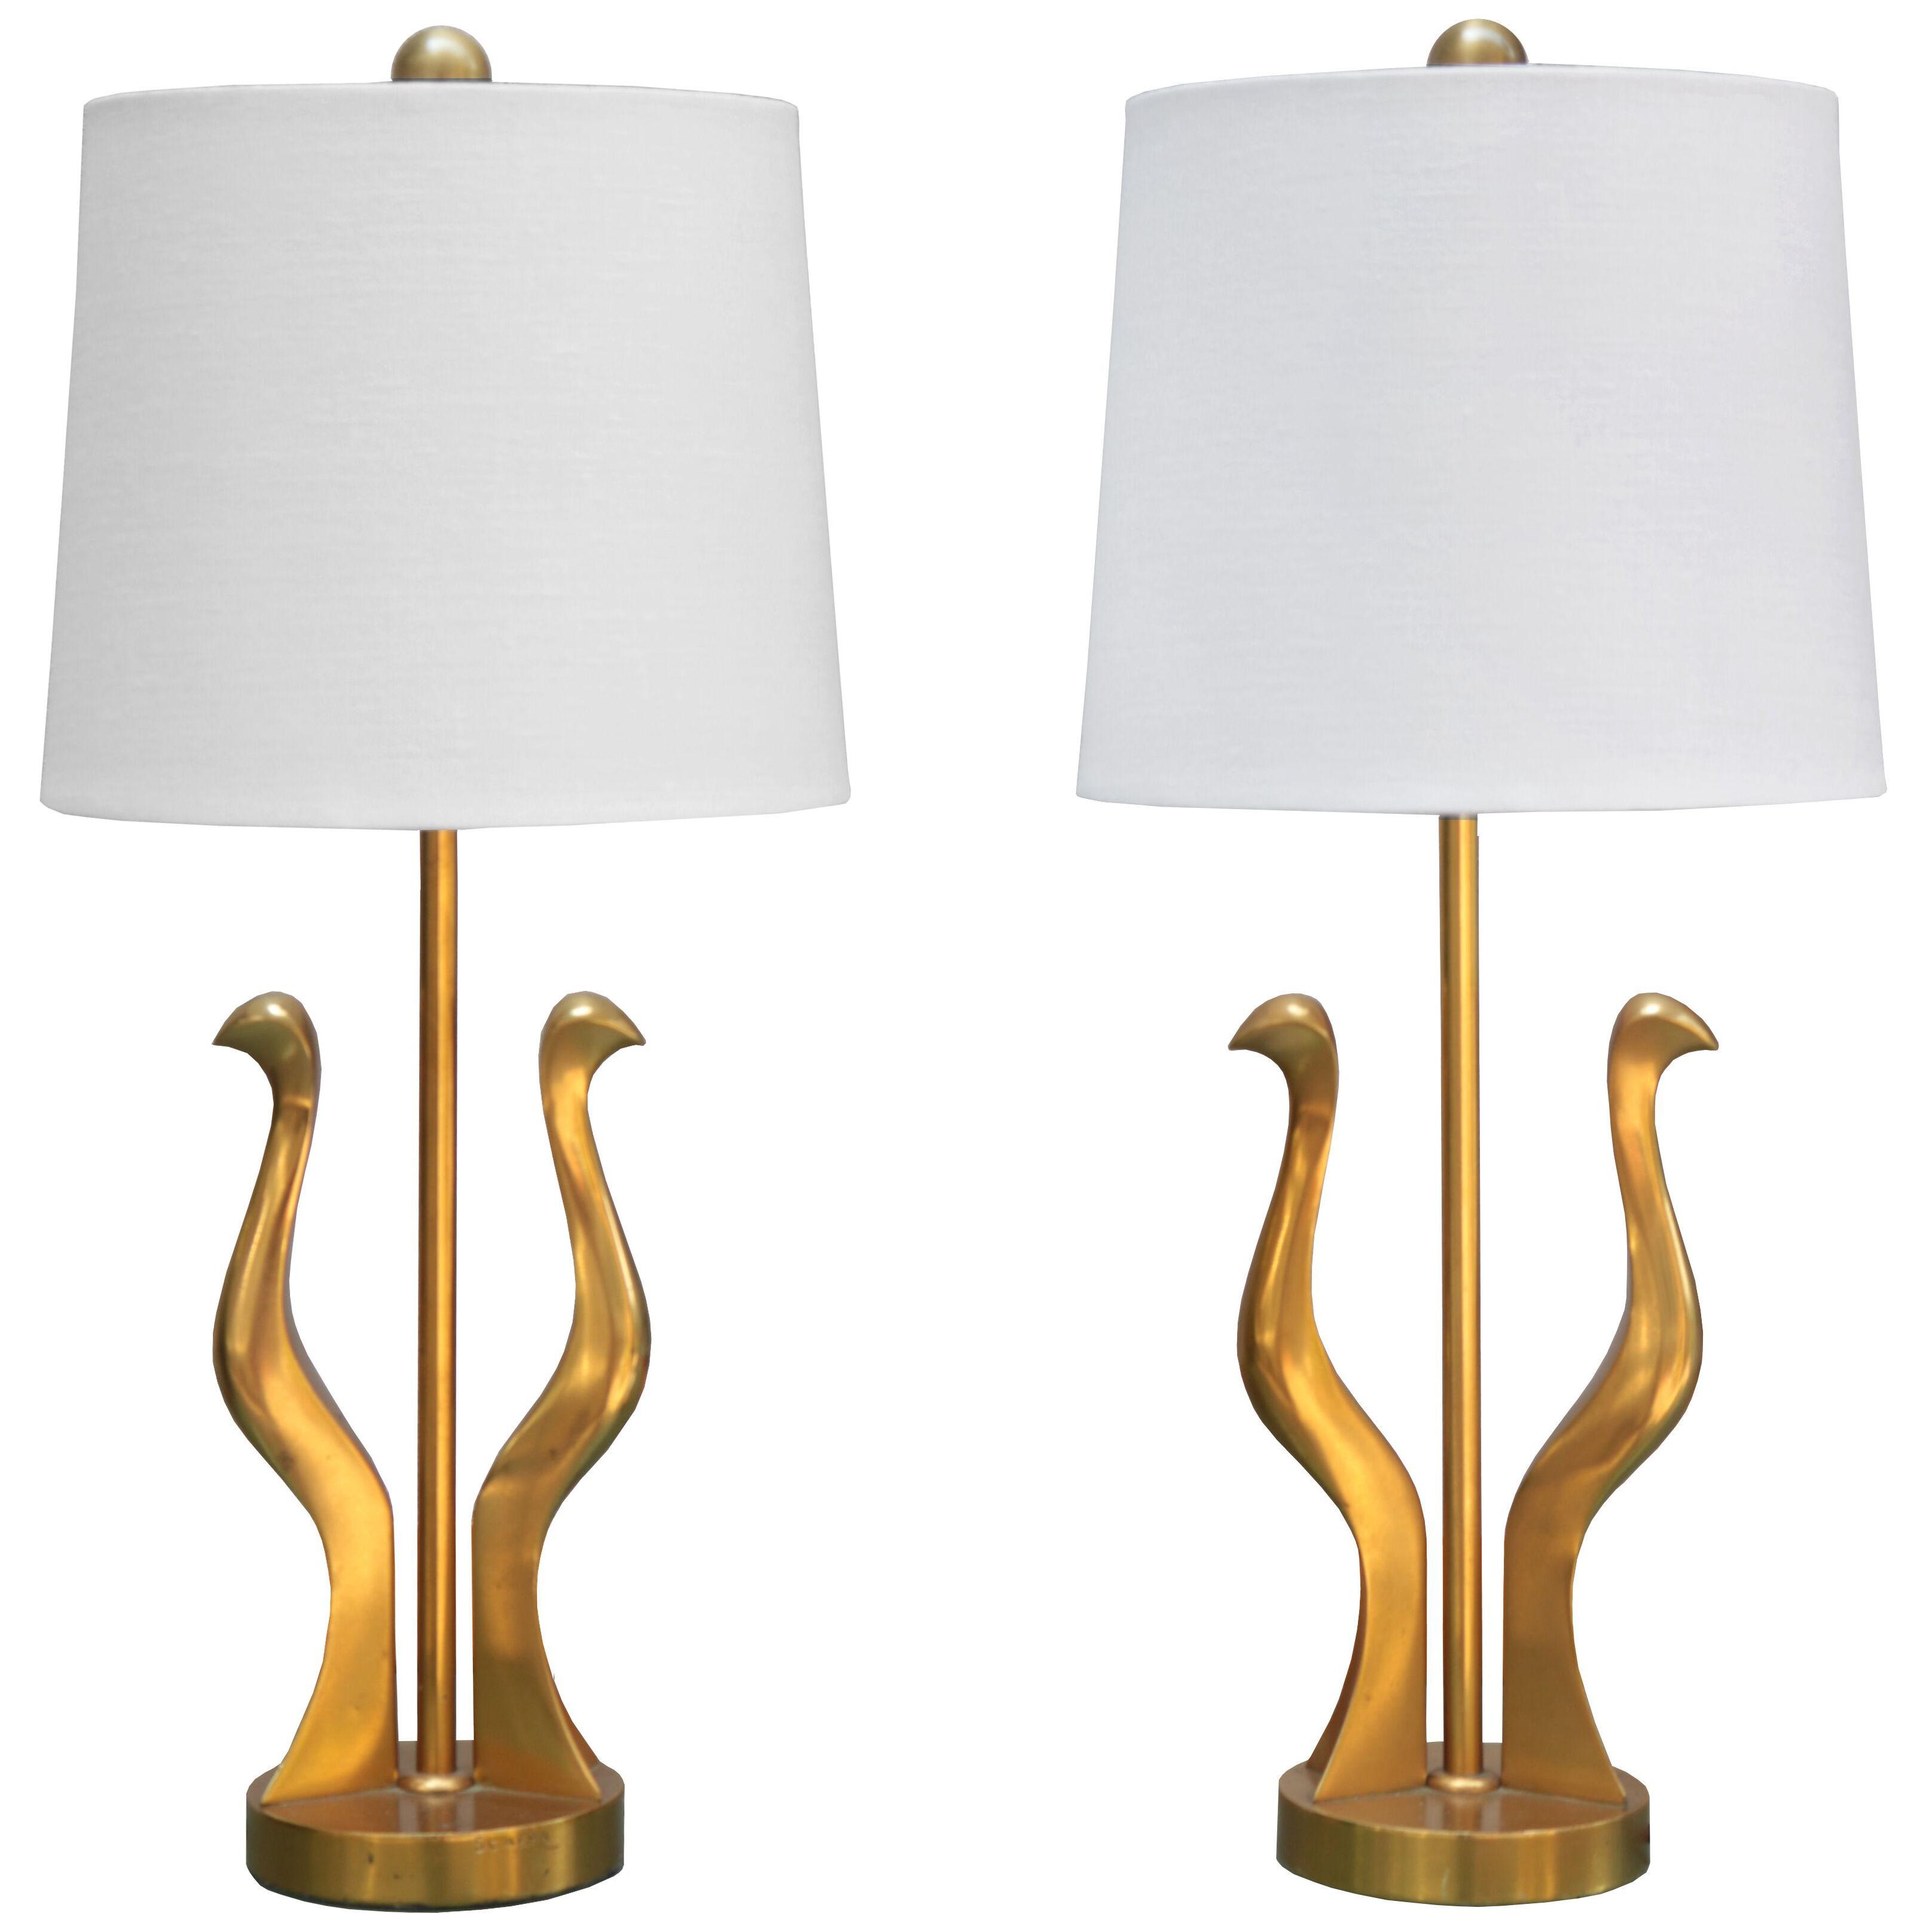 PAIR OF SMALL RICCARDO SCARPA TABLE LAMPS